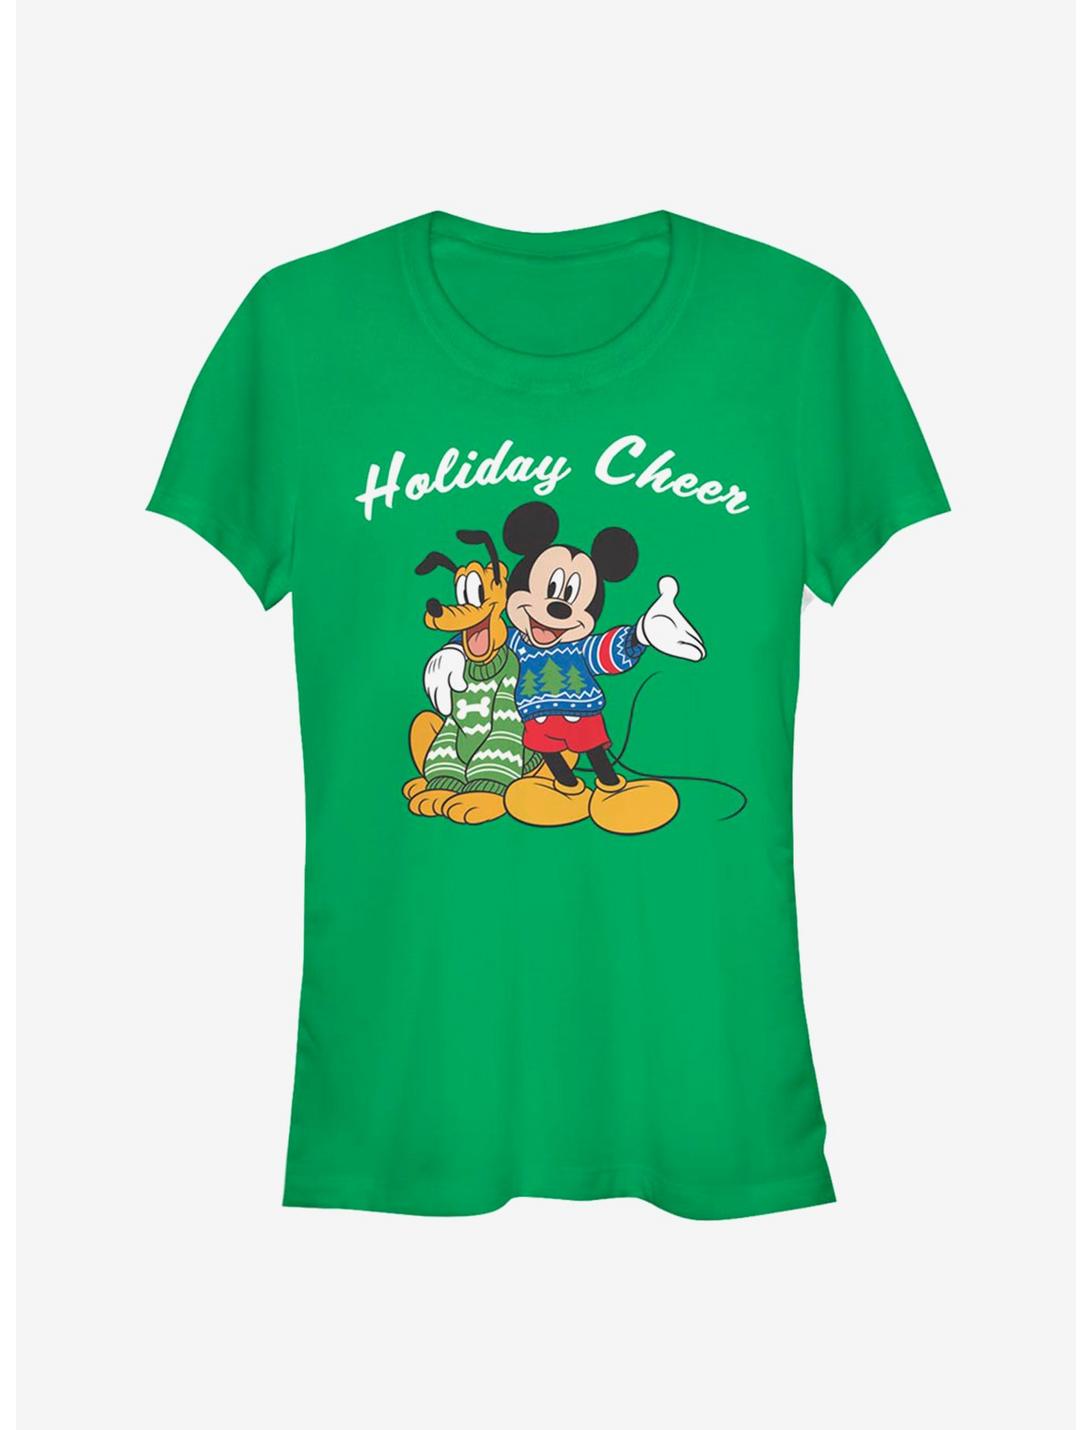 Disney Mickey Mouse And Pluto Holiday Cheer Classic Girls T-Shirt, KELLY, hi-res